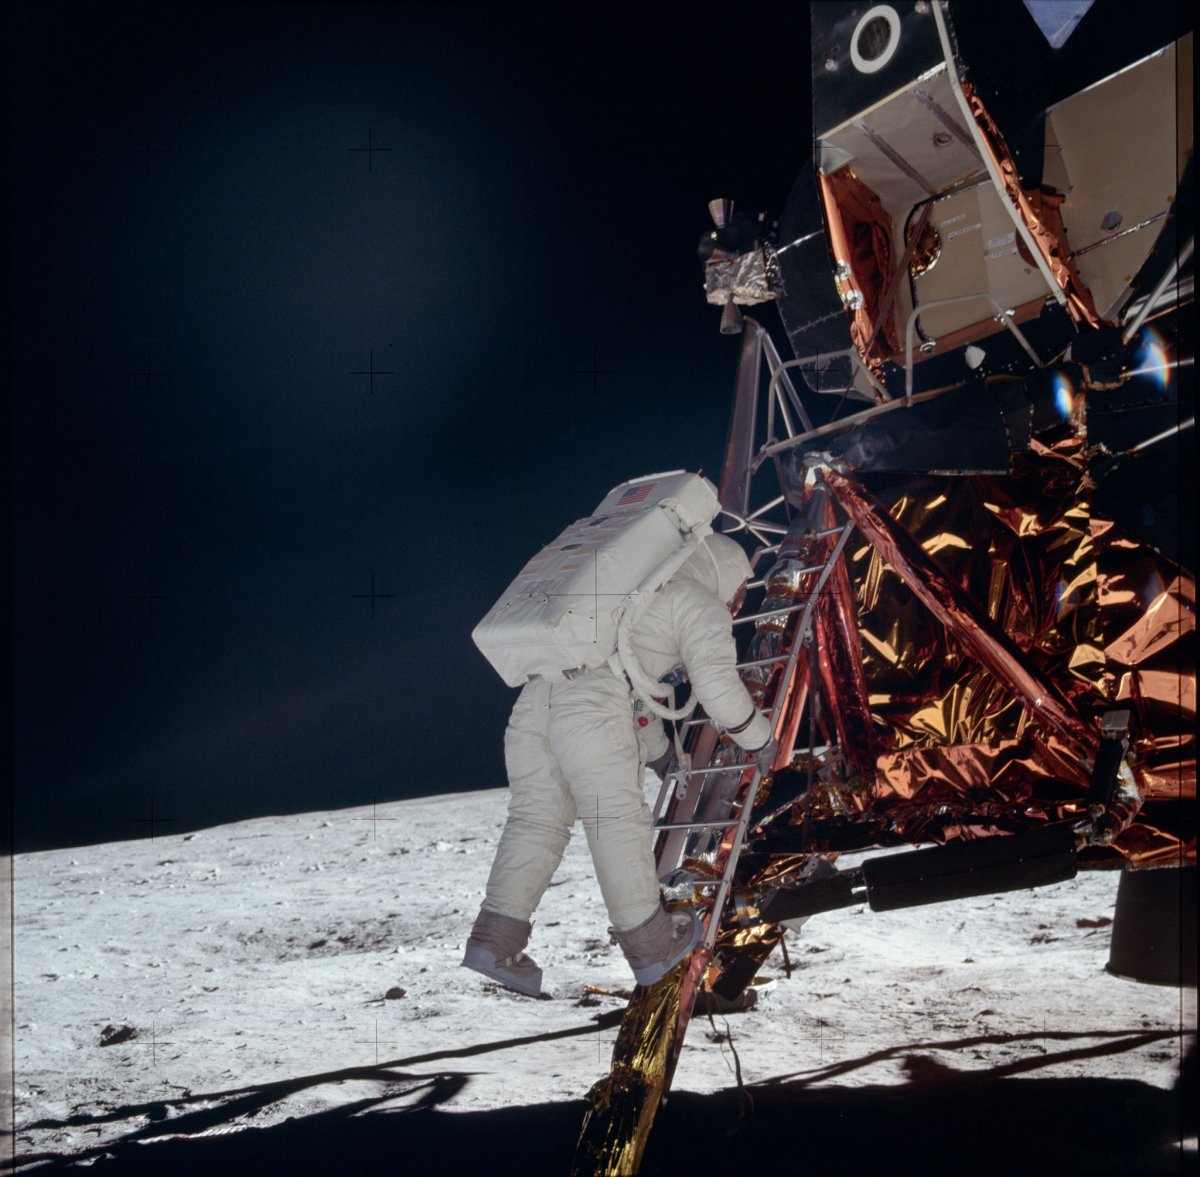 10 - Stepping down onto the moon for the first time